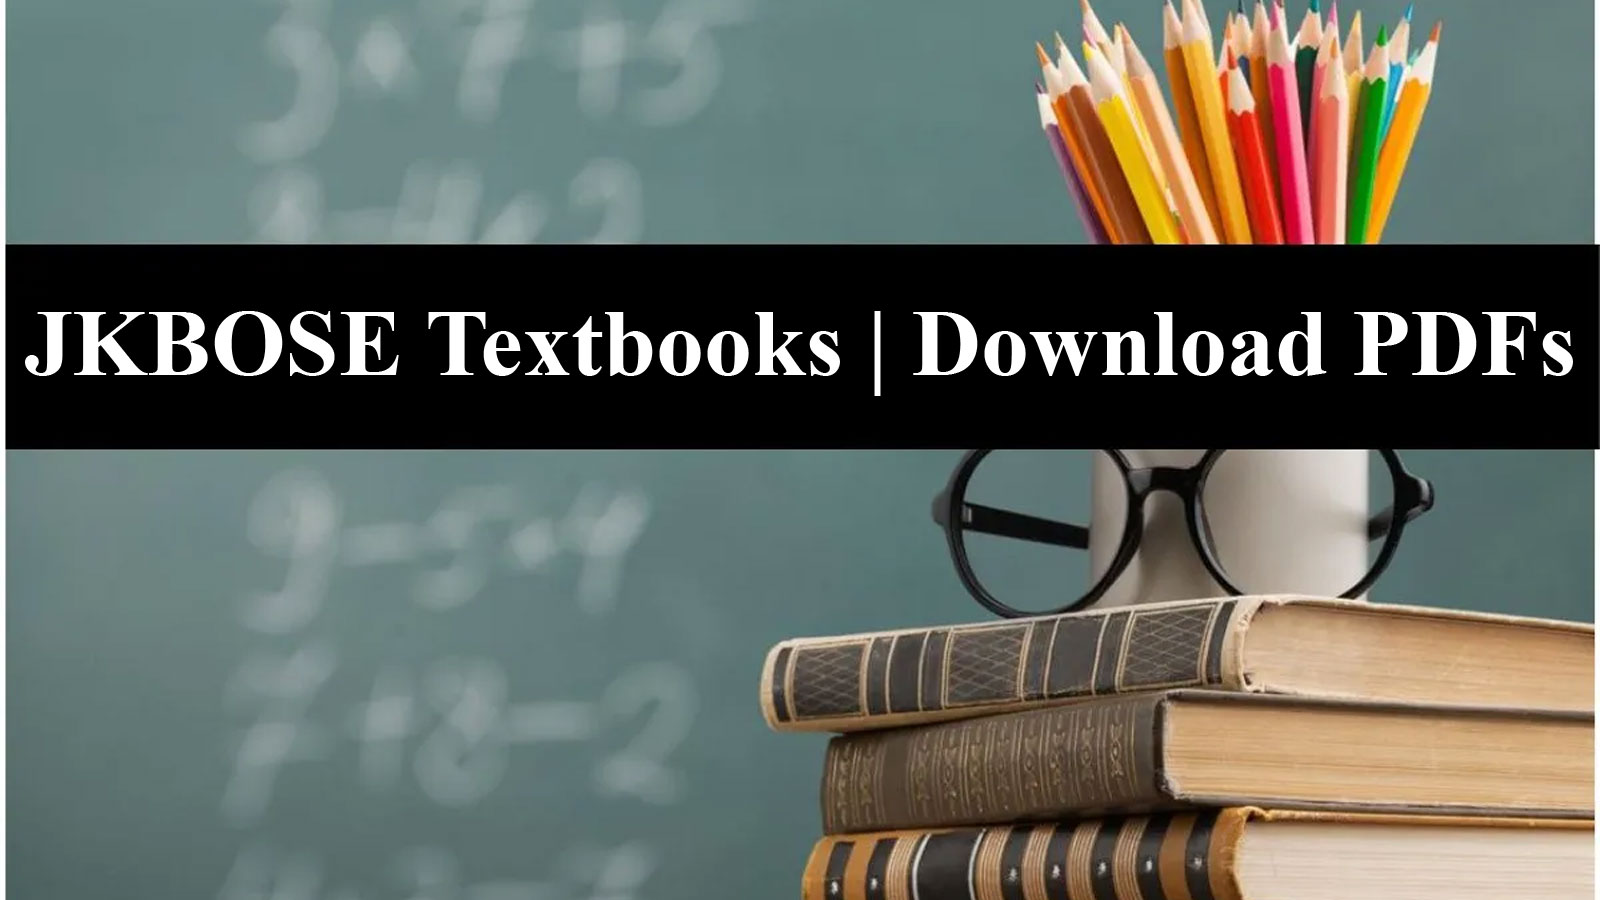 JKBOSE Class 5th Textbooks; Direct Link to Download PDFs